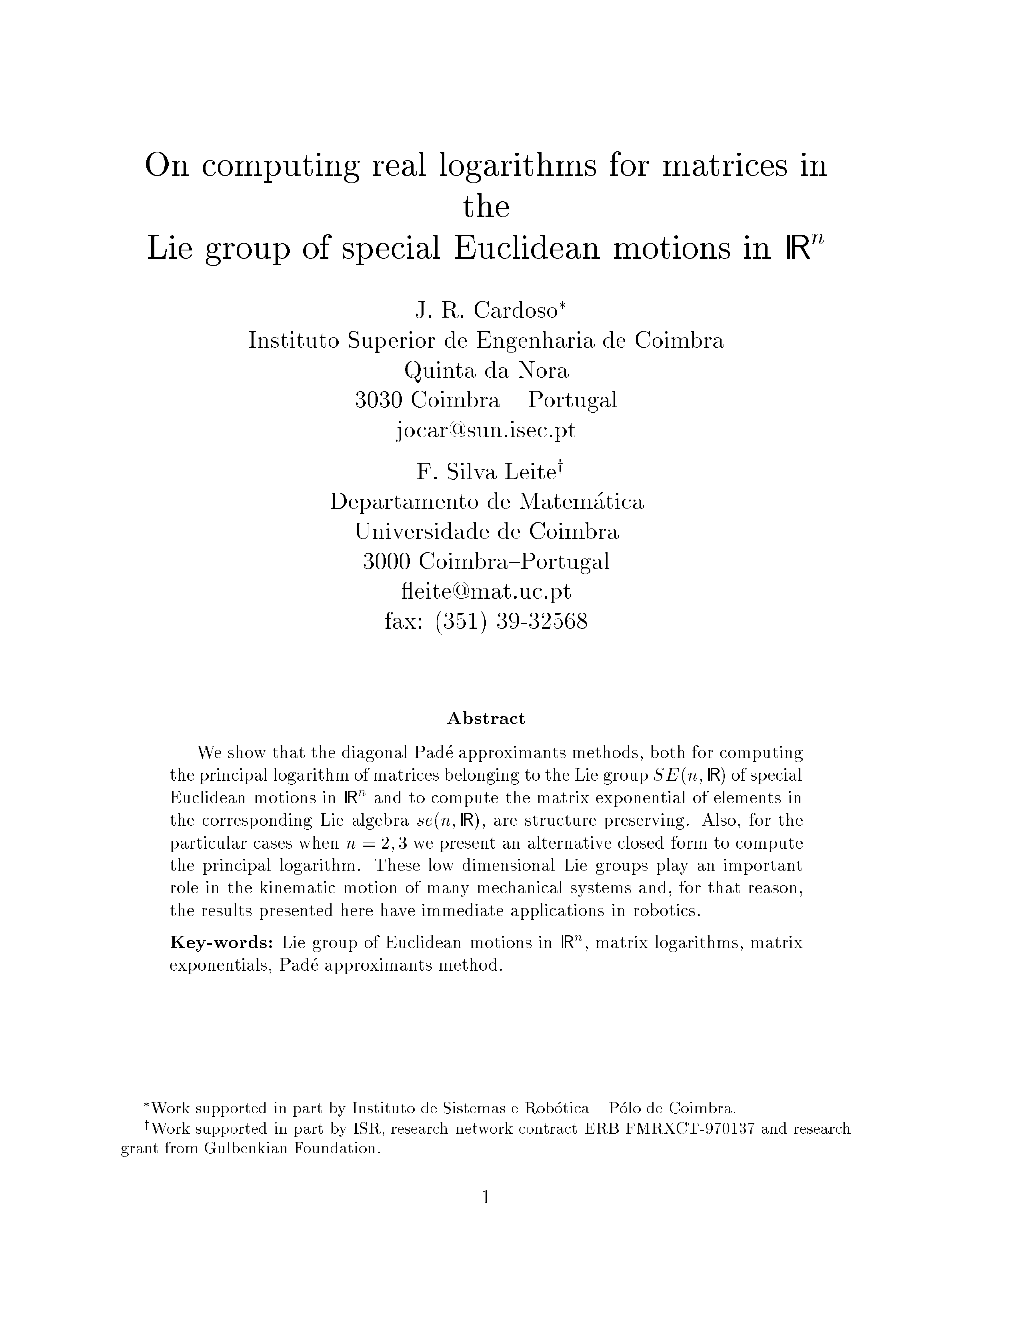 On Computing Real Logarithms for Matrices In